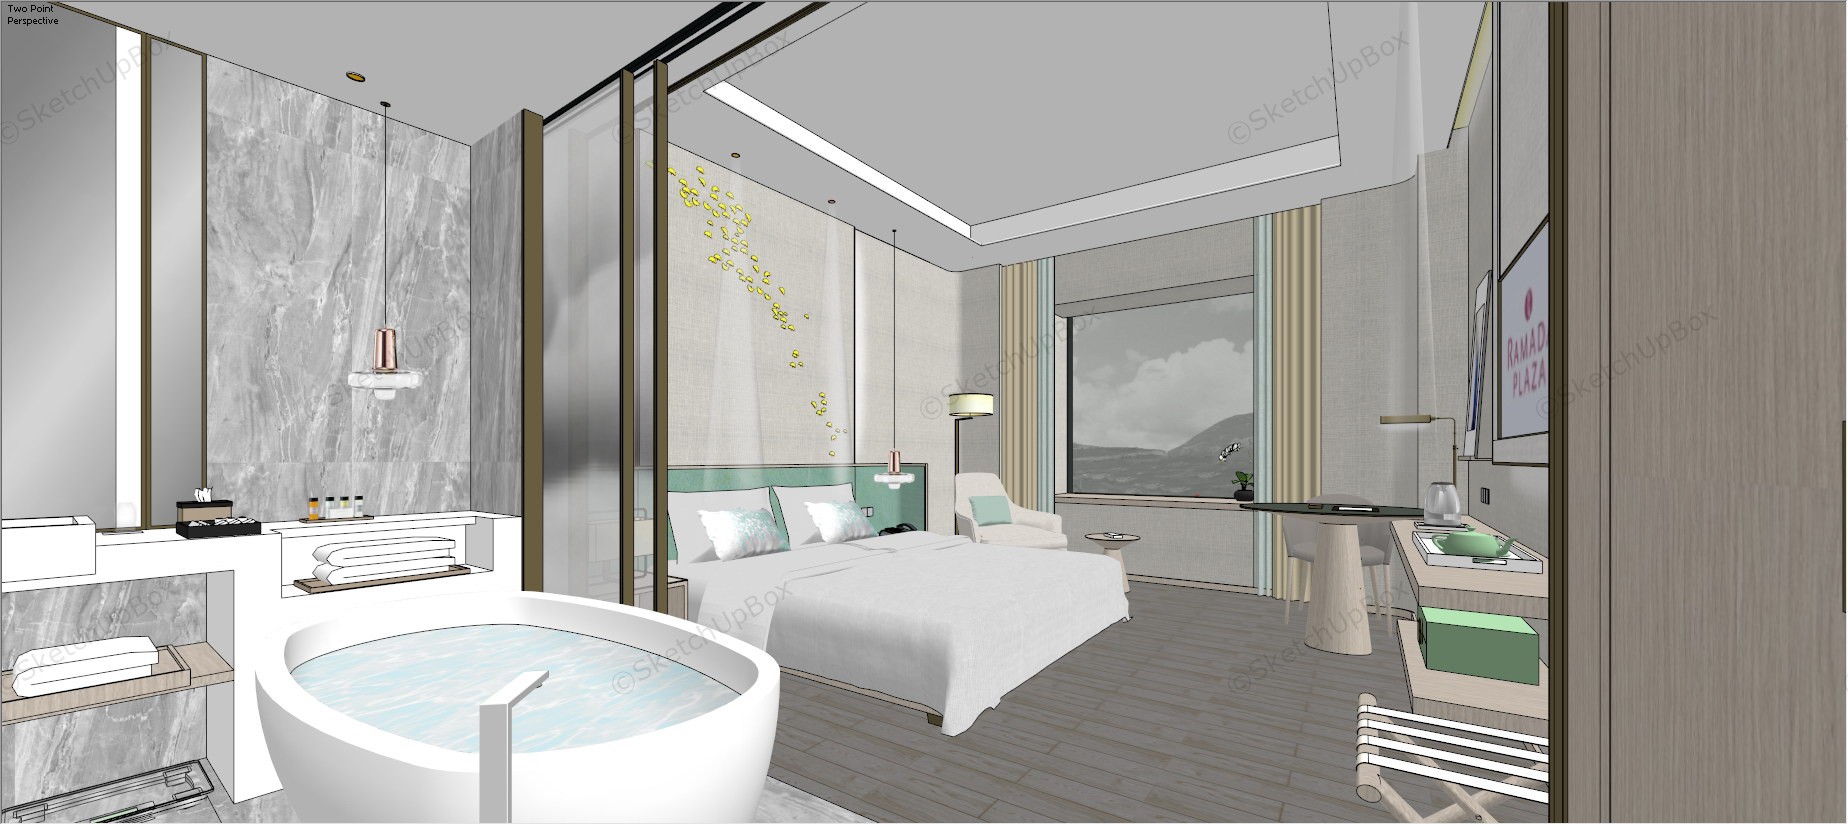 Single Deluxe Hotel Room sketchup model preview - SketchupBox